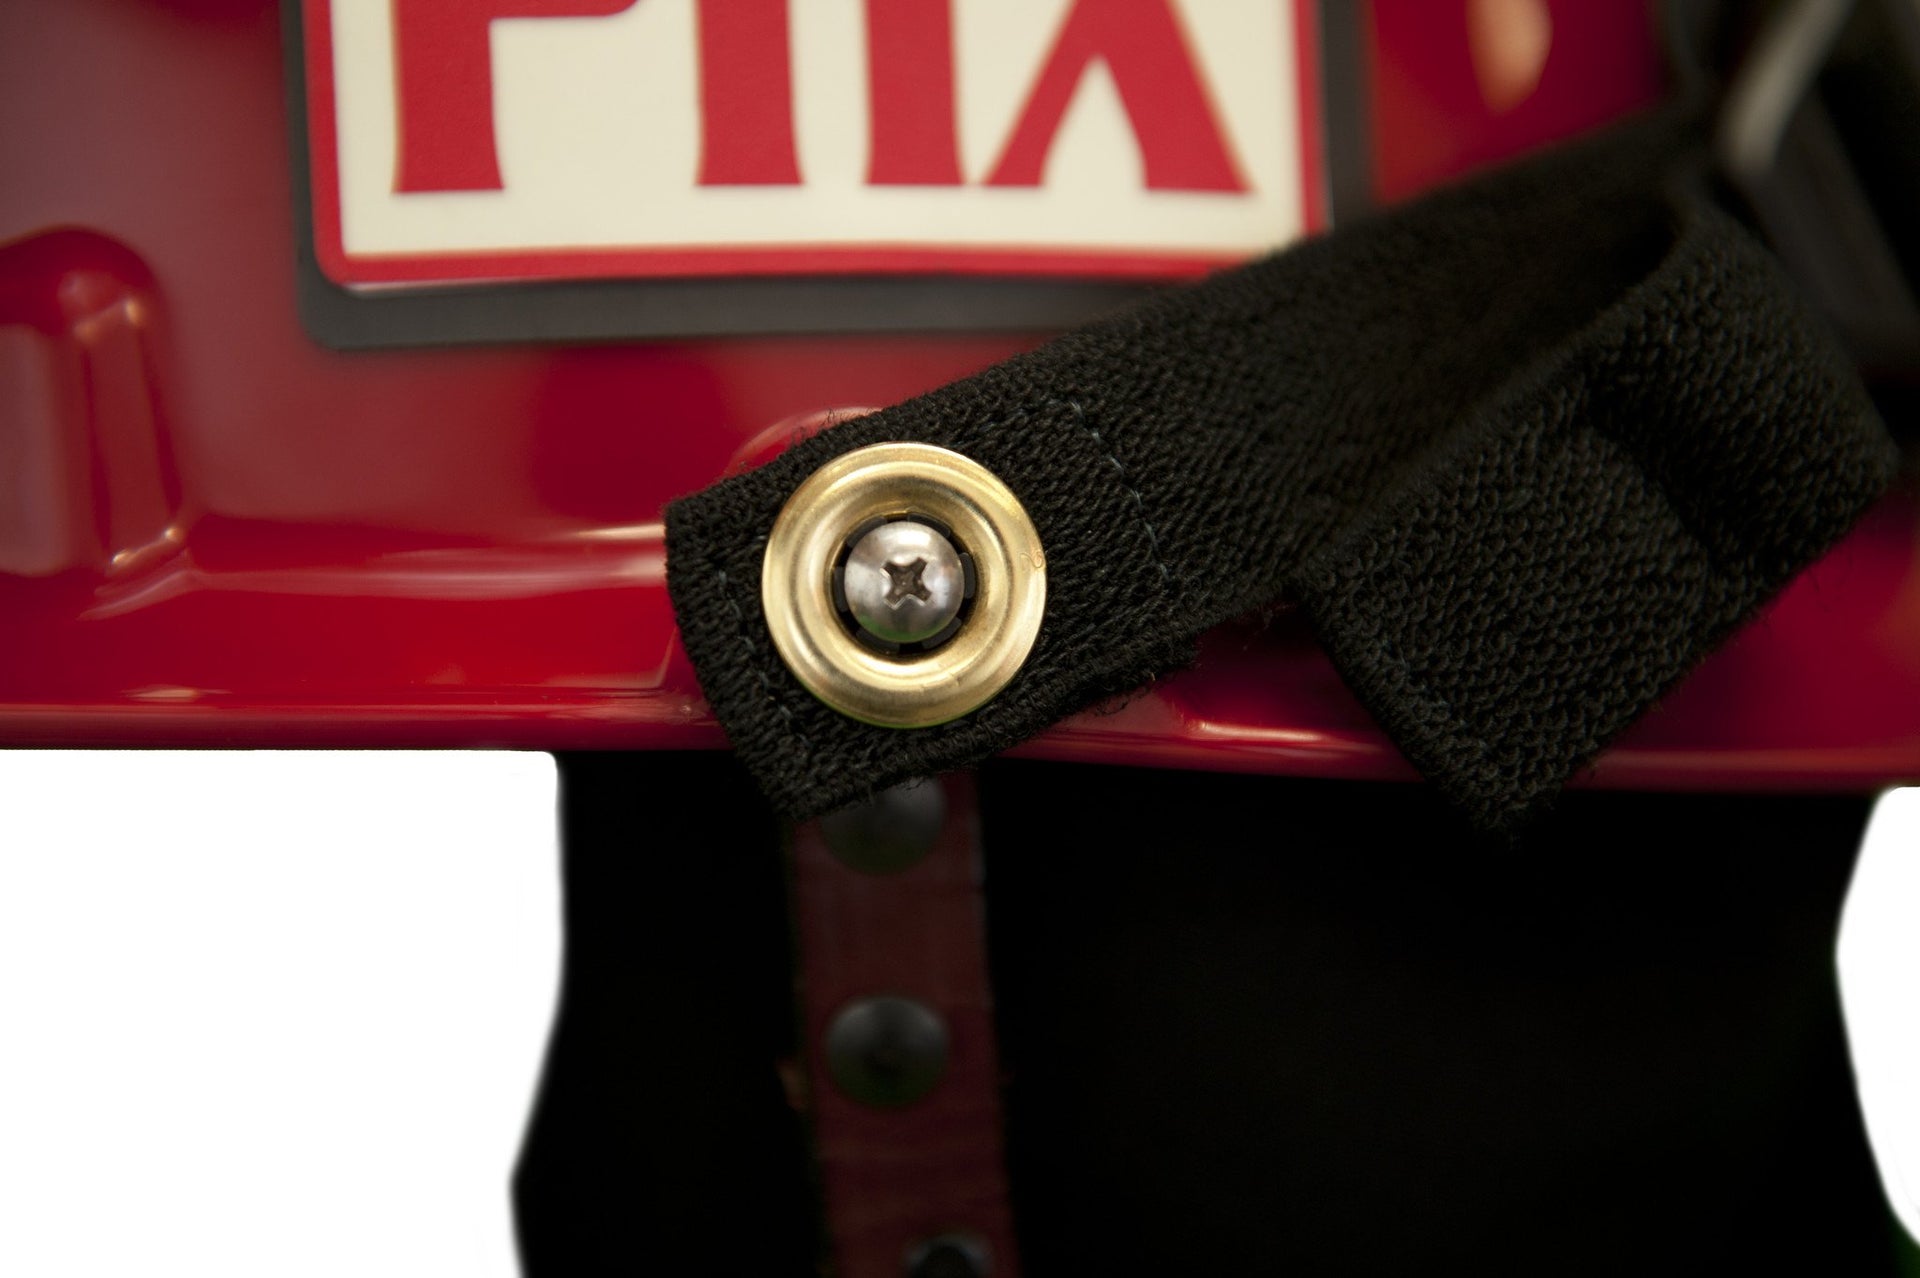 Phenix Technology First Due Structural Fire Helmet | The Fire Center | The Fire Store | Store | Fuego Fire Center | Firefighter Gear | Trusted by many departments for over 48 years, the Phenix First Due structural fire helmet provides all the protection you want and need while keeping your long-term health in mind.  The safest firefighting helmet is the one you keep on your head.  The lightest structural NFPA 1971 compliant helmet